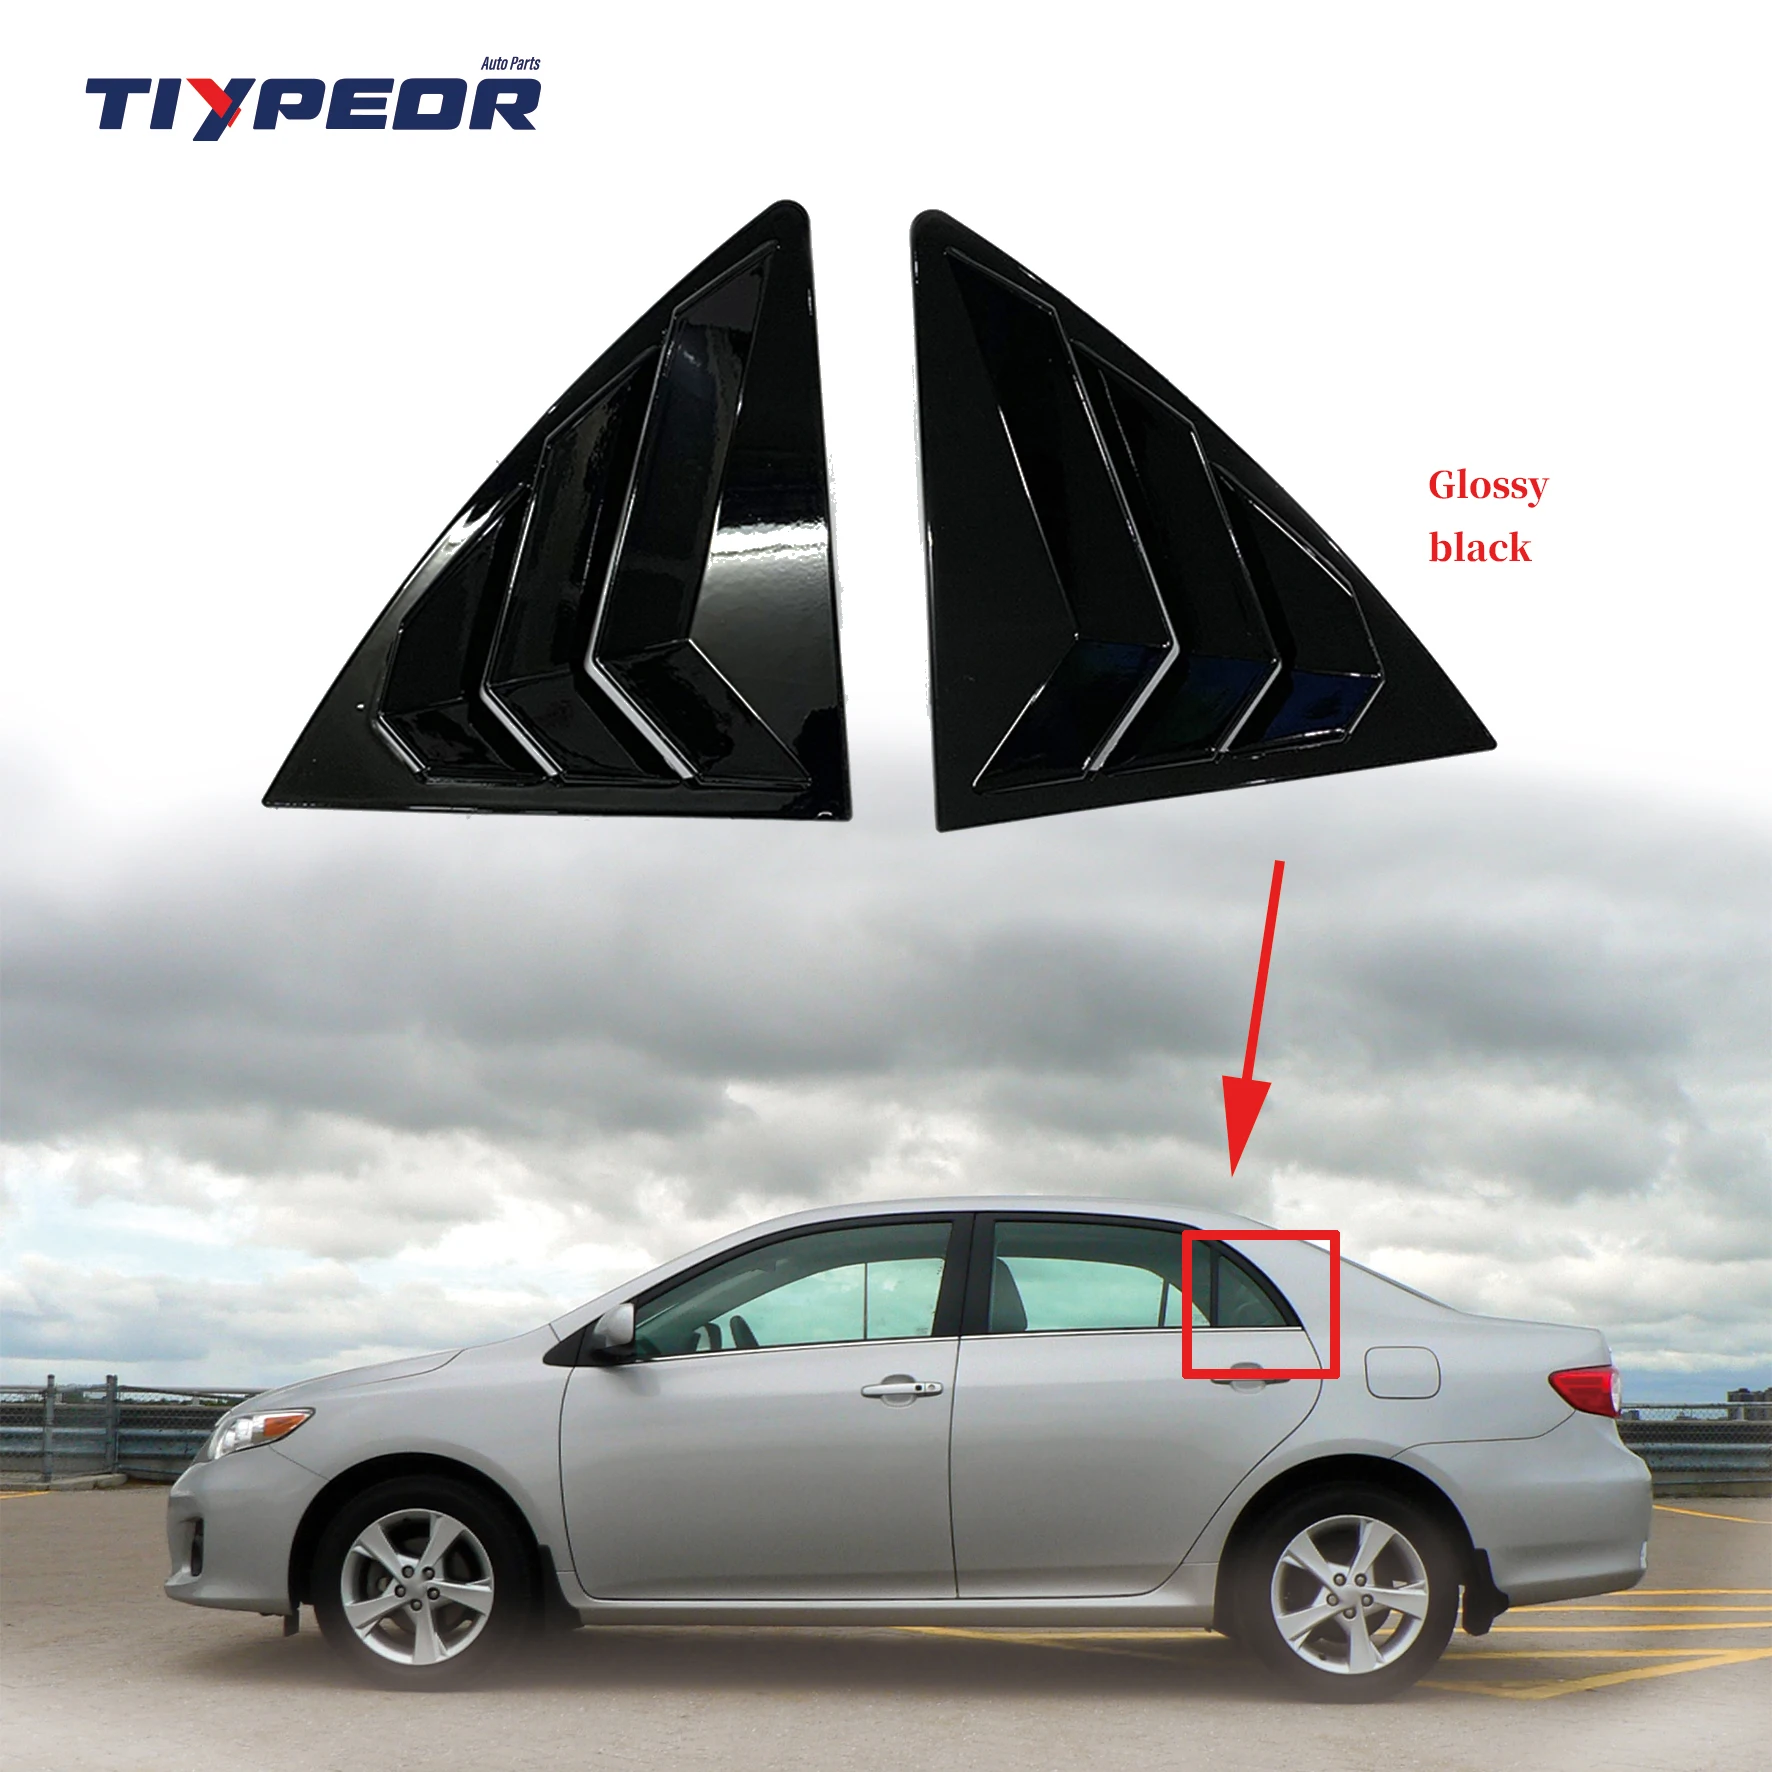 

Rear Side Window Louver Glossy Black Tiypeor Side Air Vent Scoop Shade For Toyota Corolla 2007 - 2013 2008 2009 2010 2011 2012